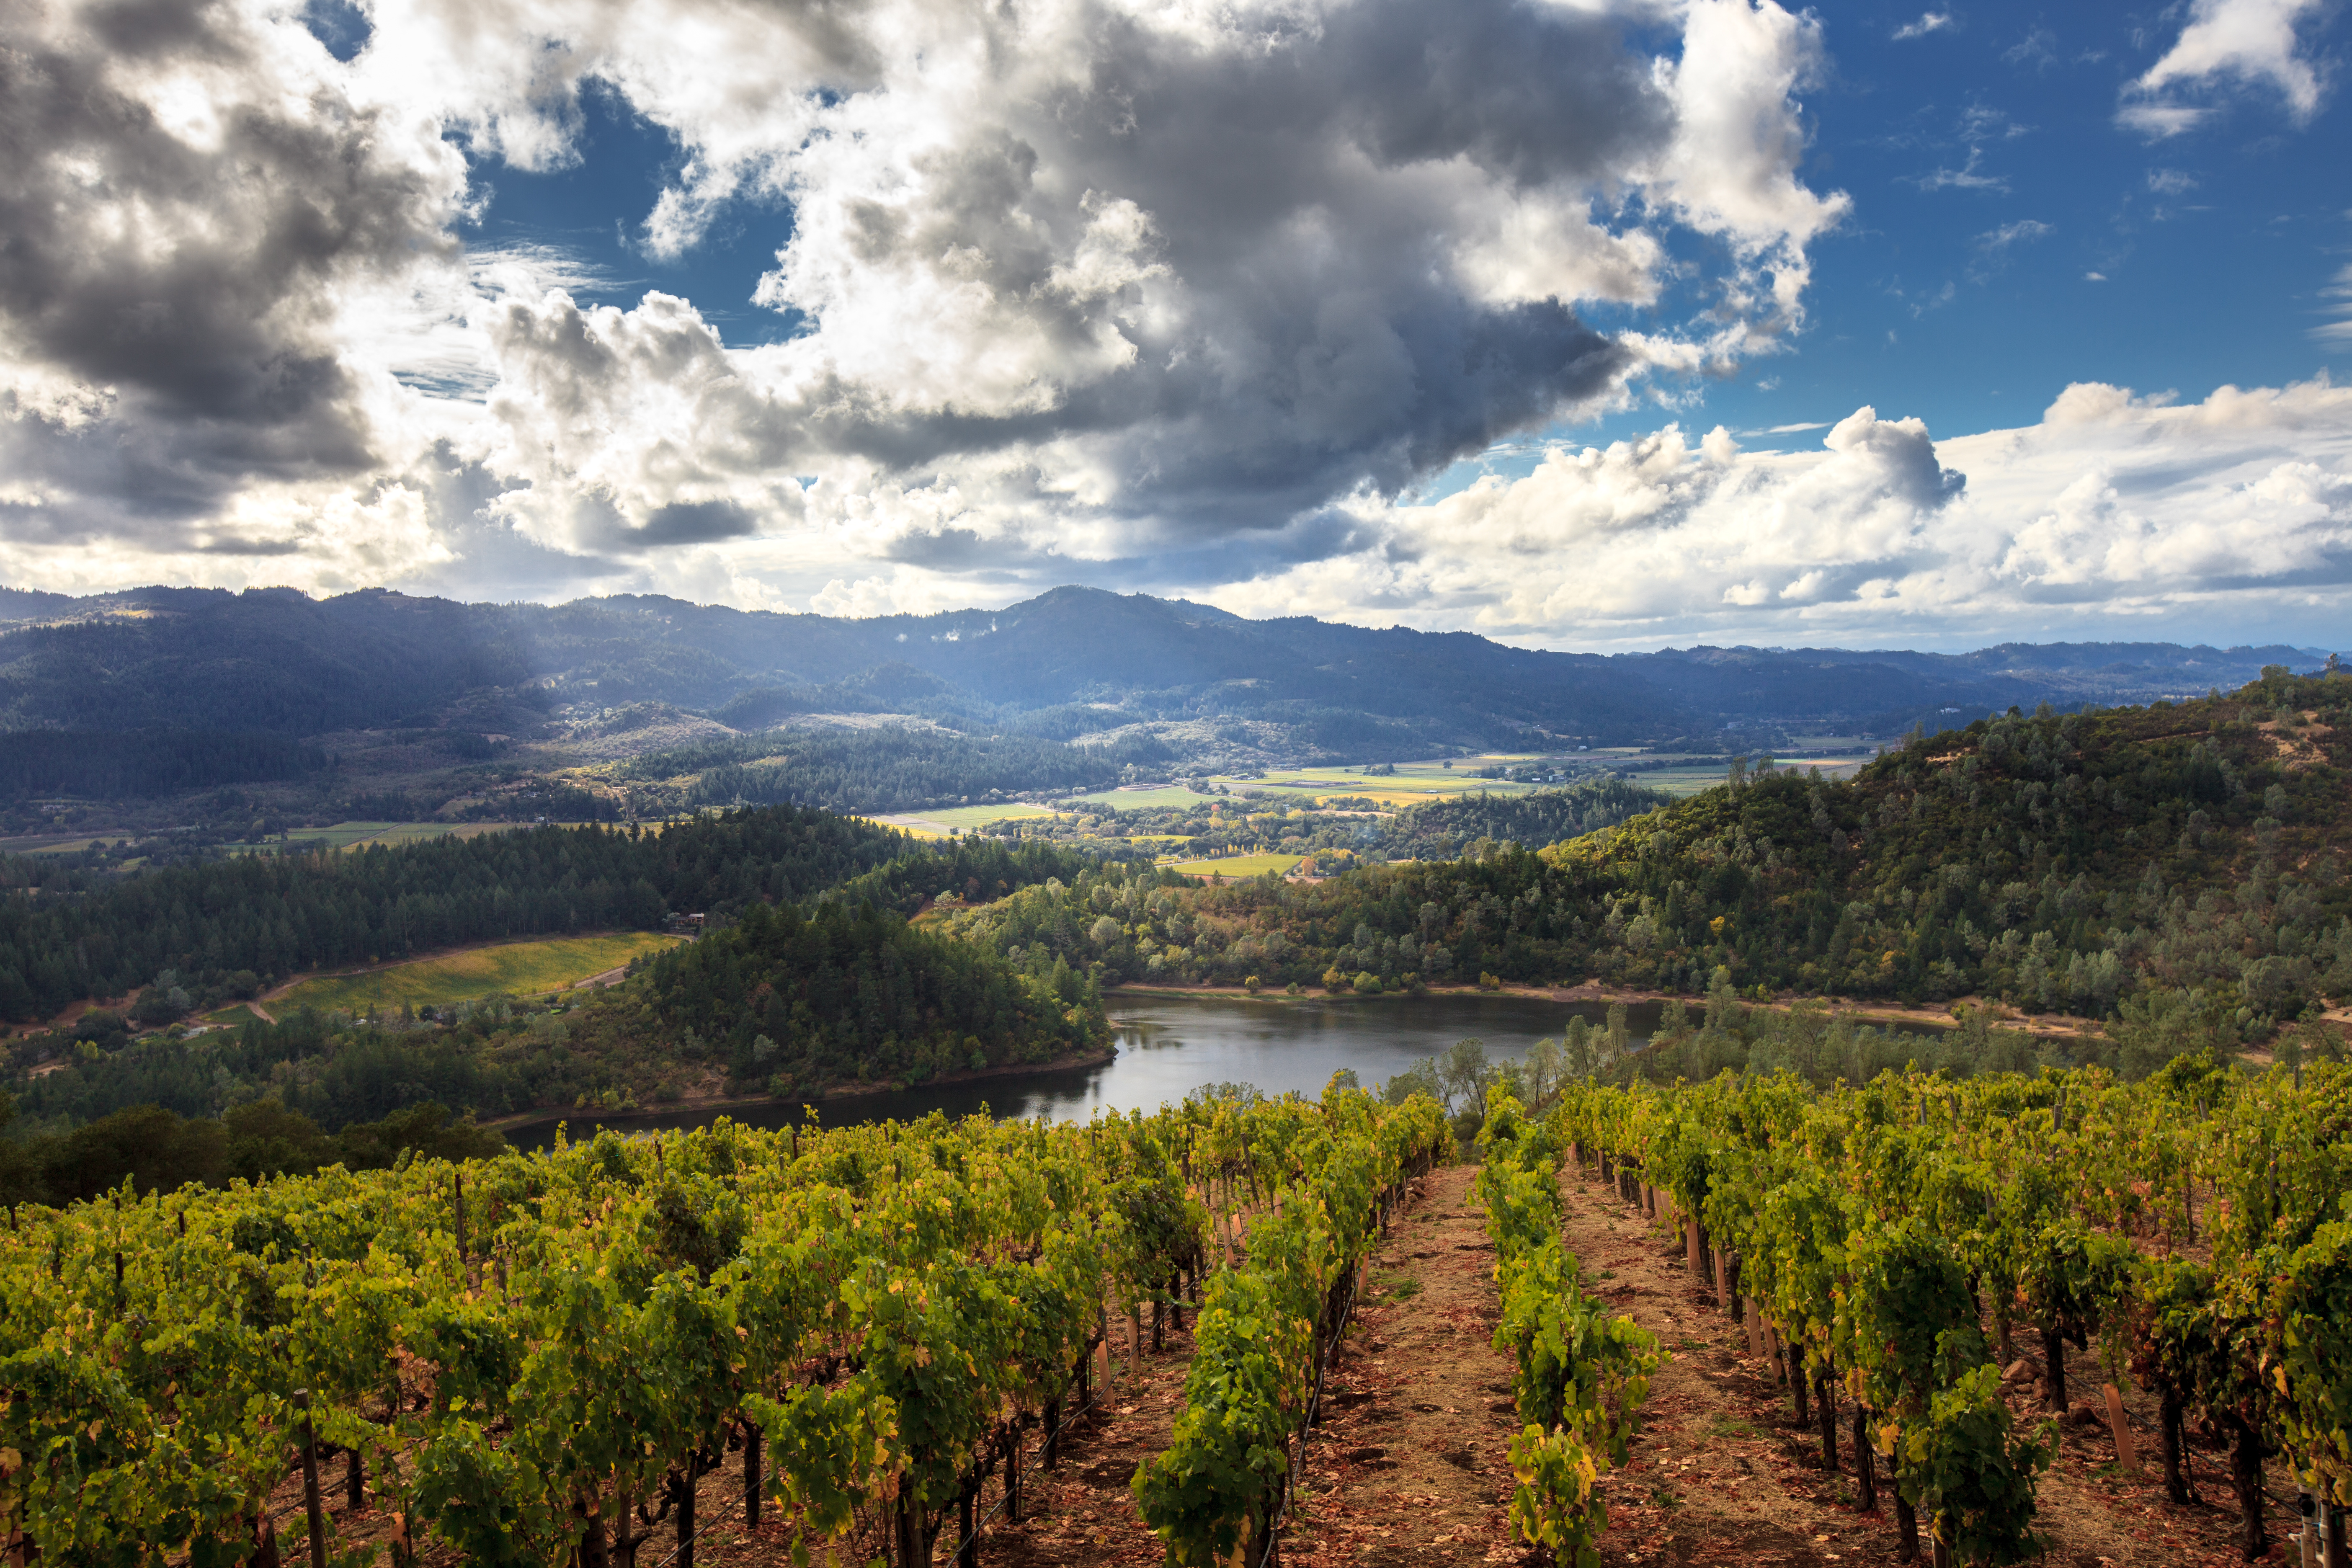 Panorama of Howell Mountain, Napa Valley wine country in autumn. Sun and clouds at a Napa, California vineyard with mountains, valleys and lake.